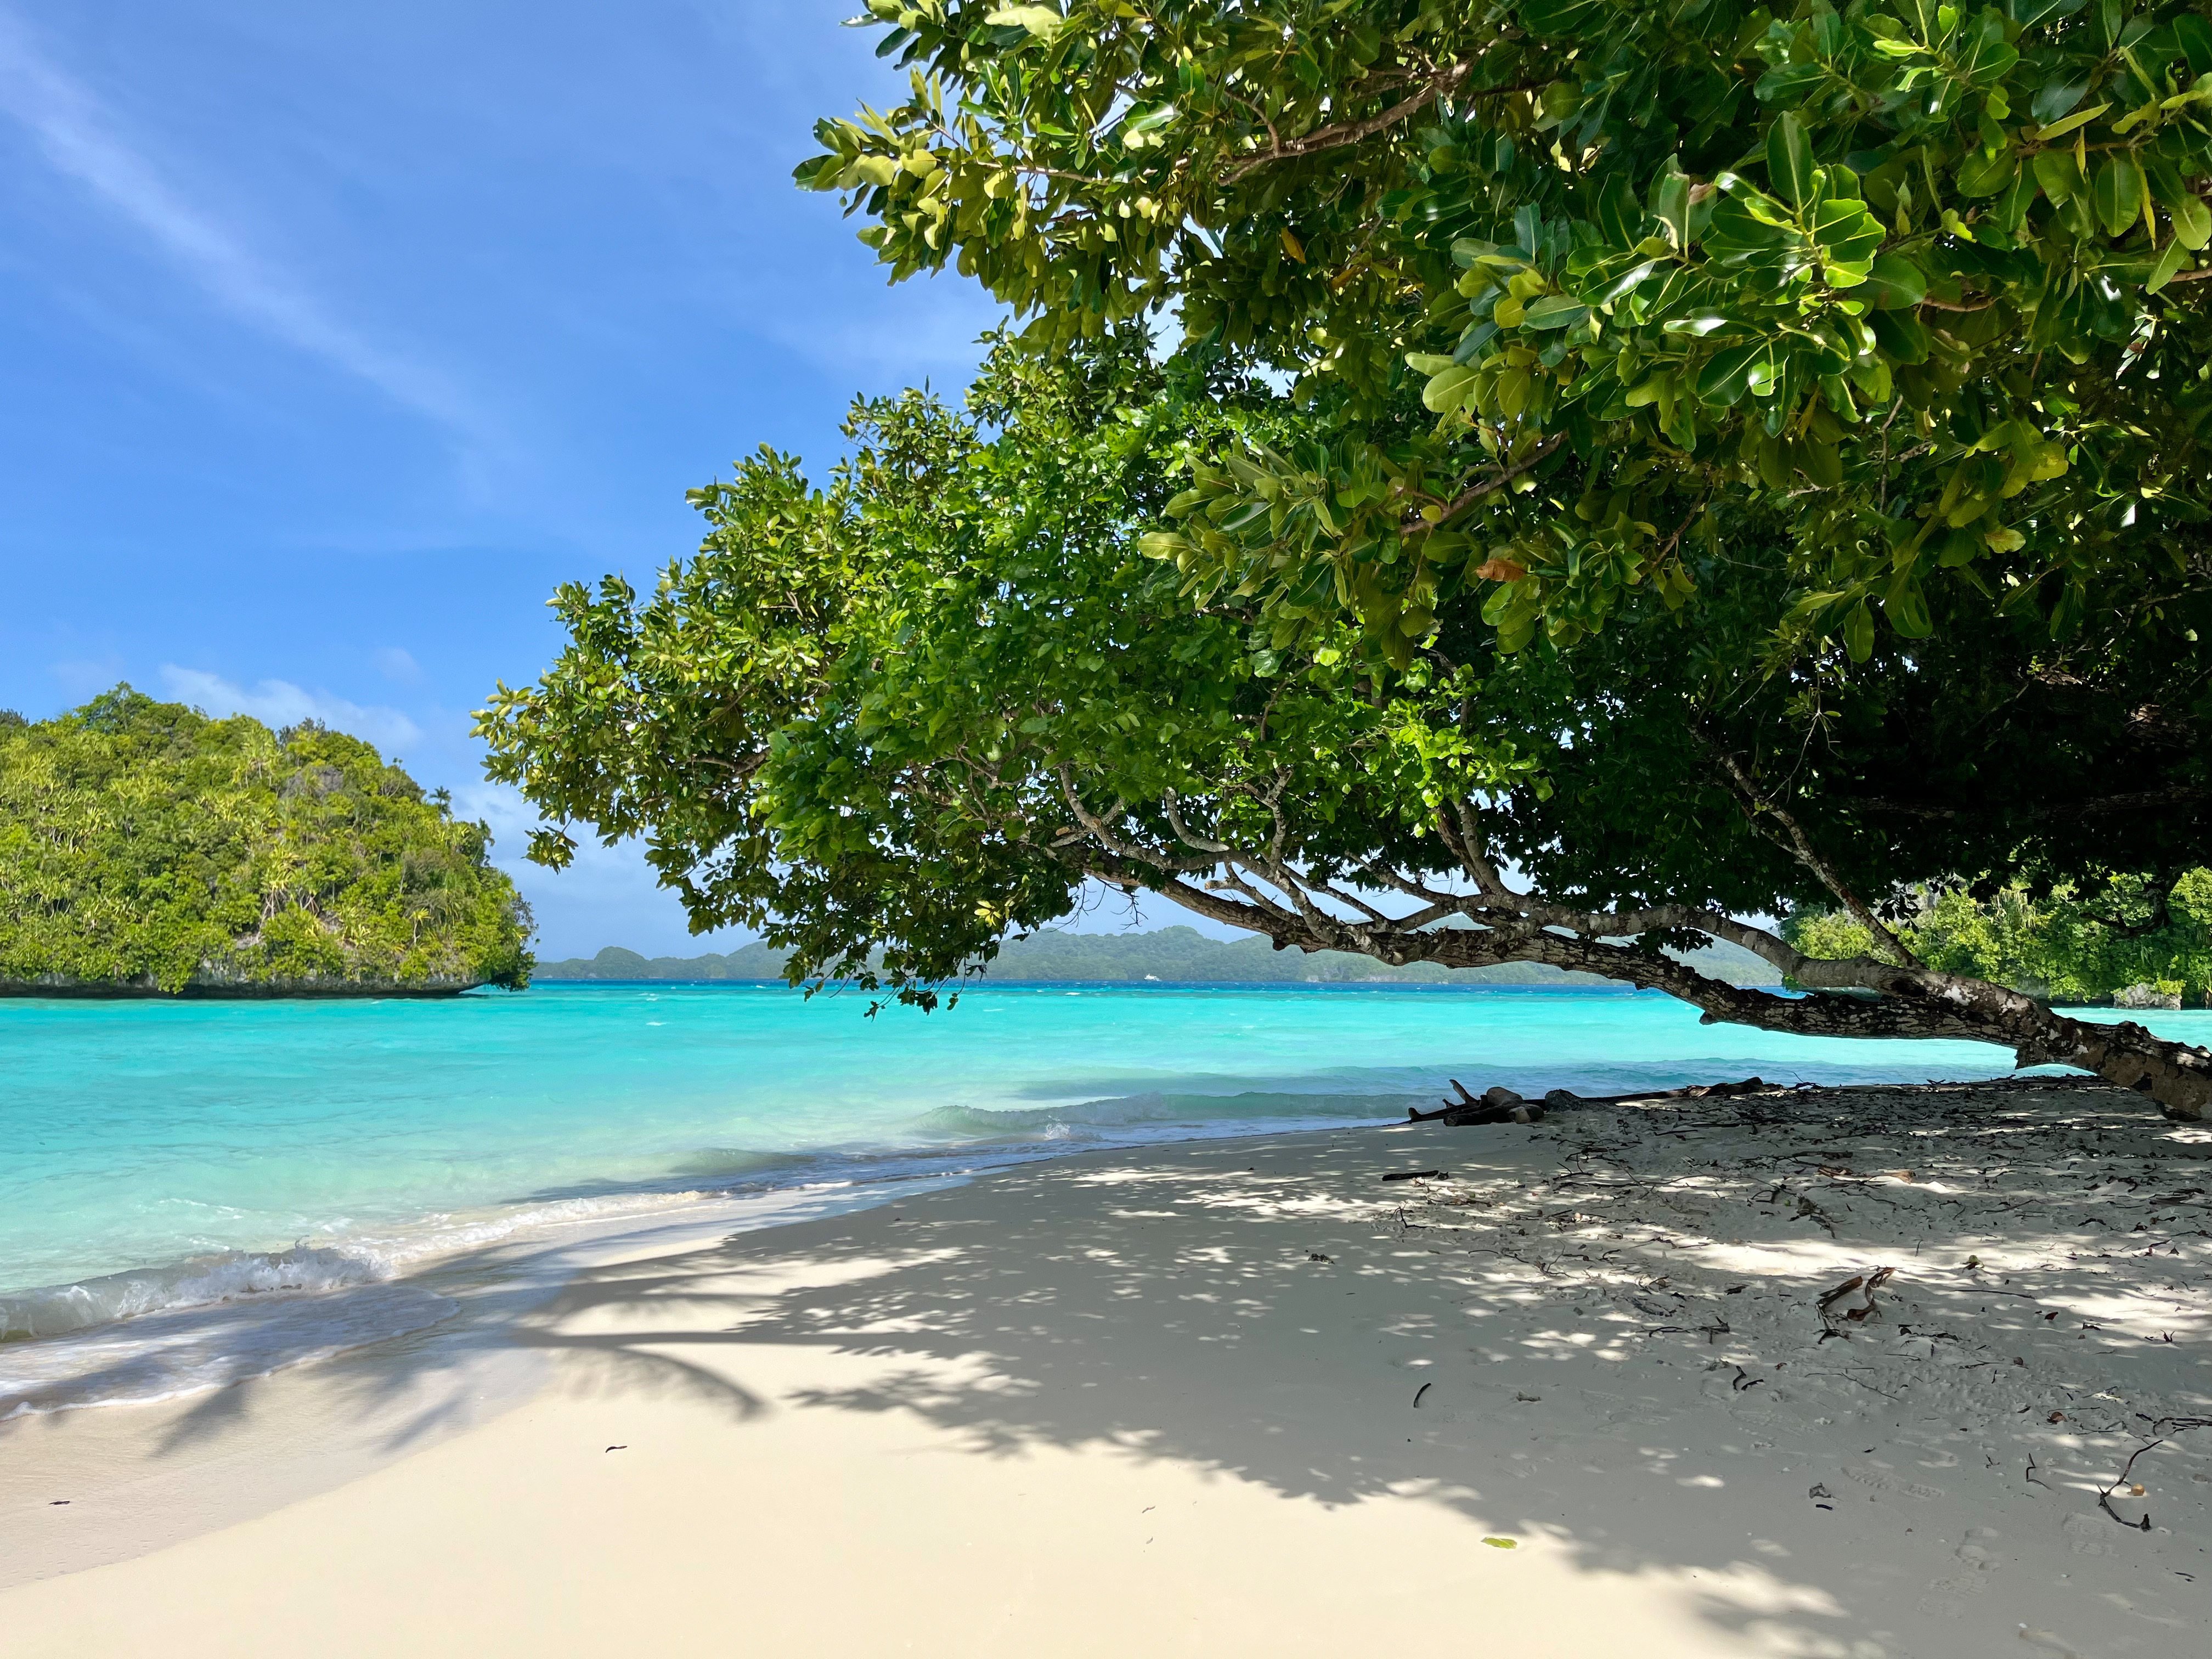 Empty white sand beaches, such as this one in the Rock Islands, are one of Palau’s attractions. Photo: Lee Cobaj